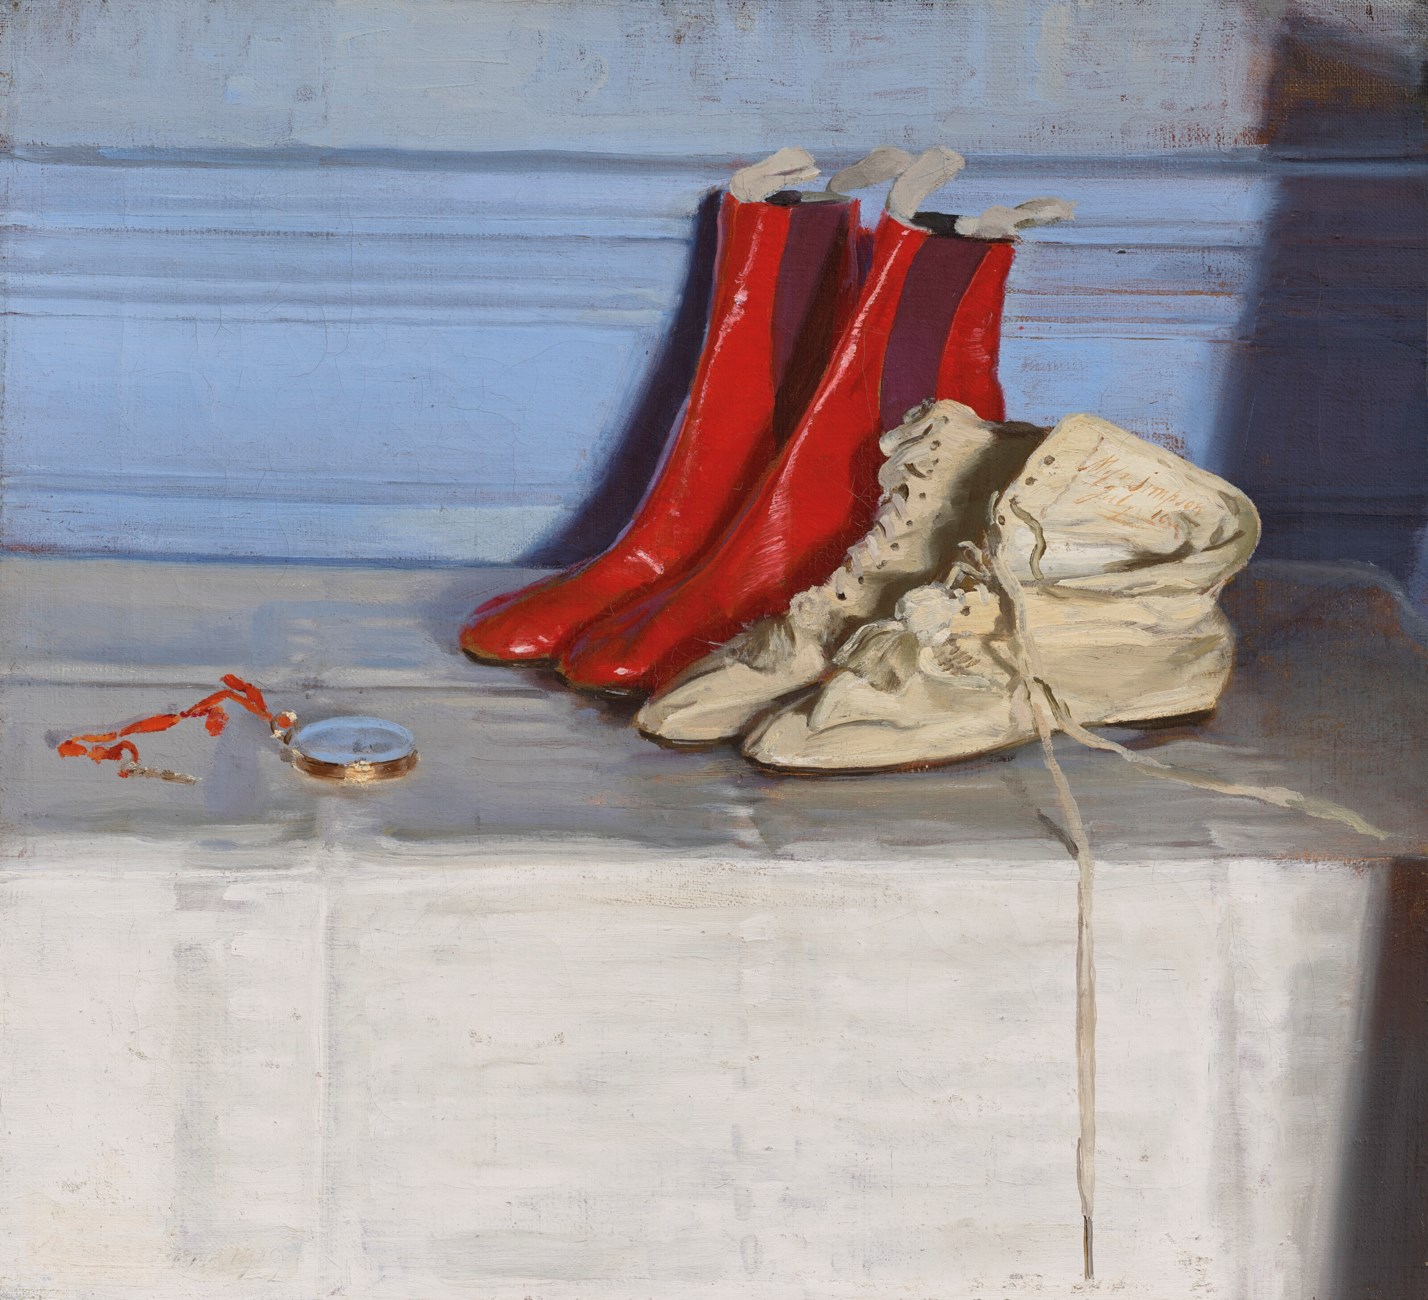 Miss Simpson's Boots by William Nicholson - 1919 - 55 x 59.7 cm private collection